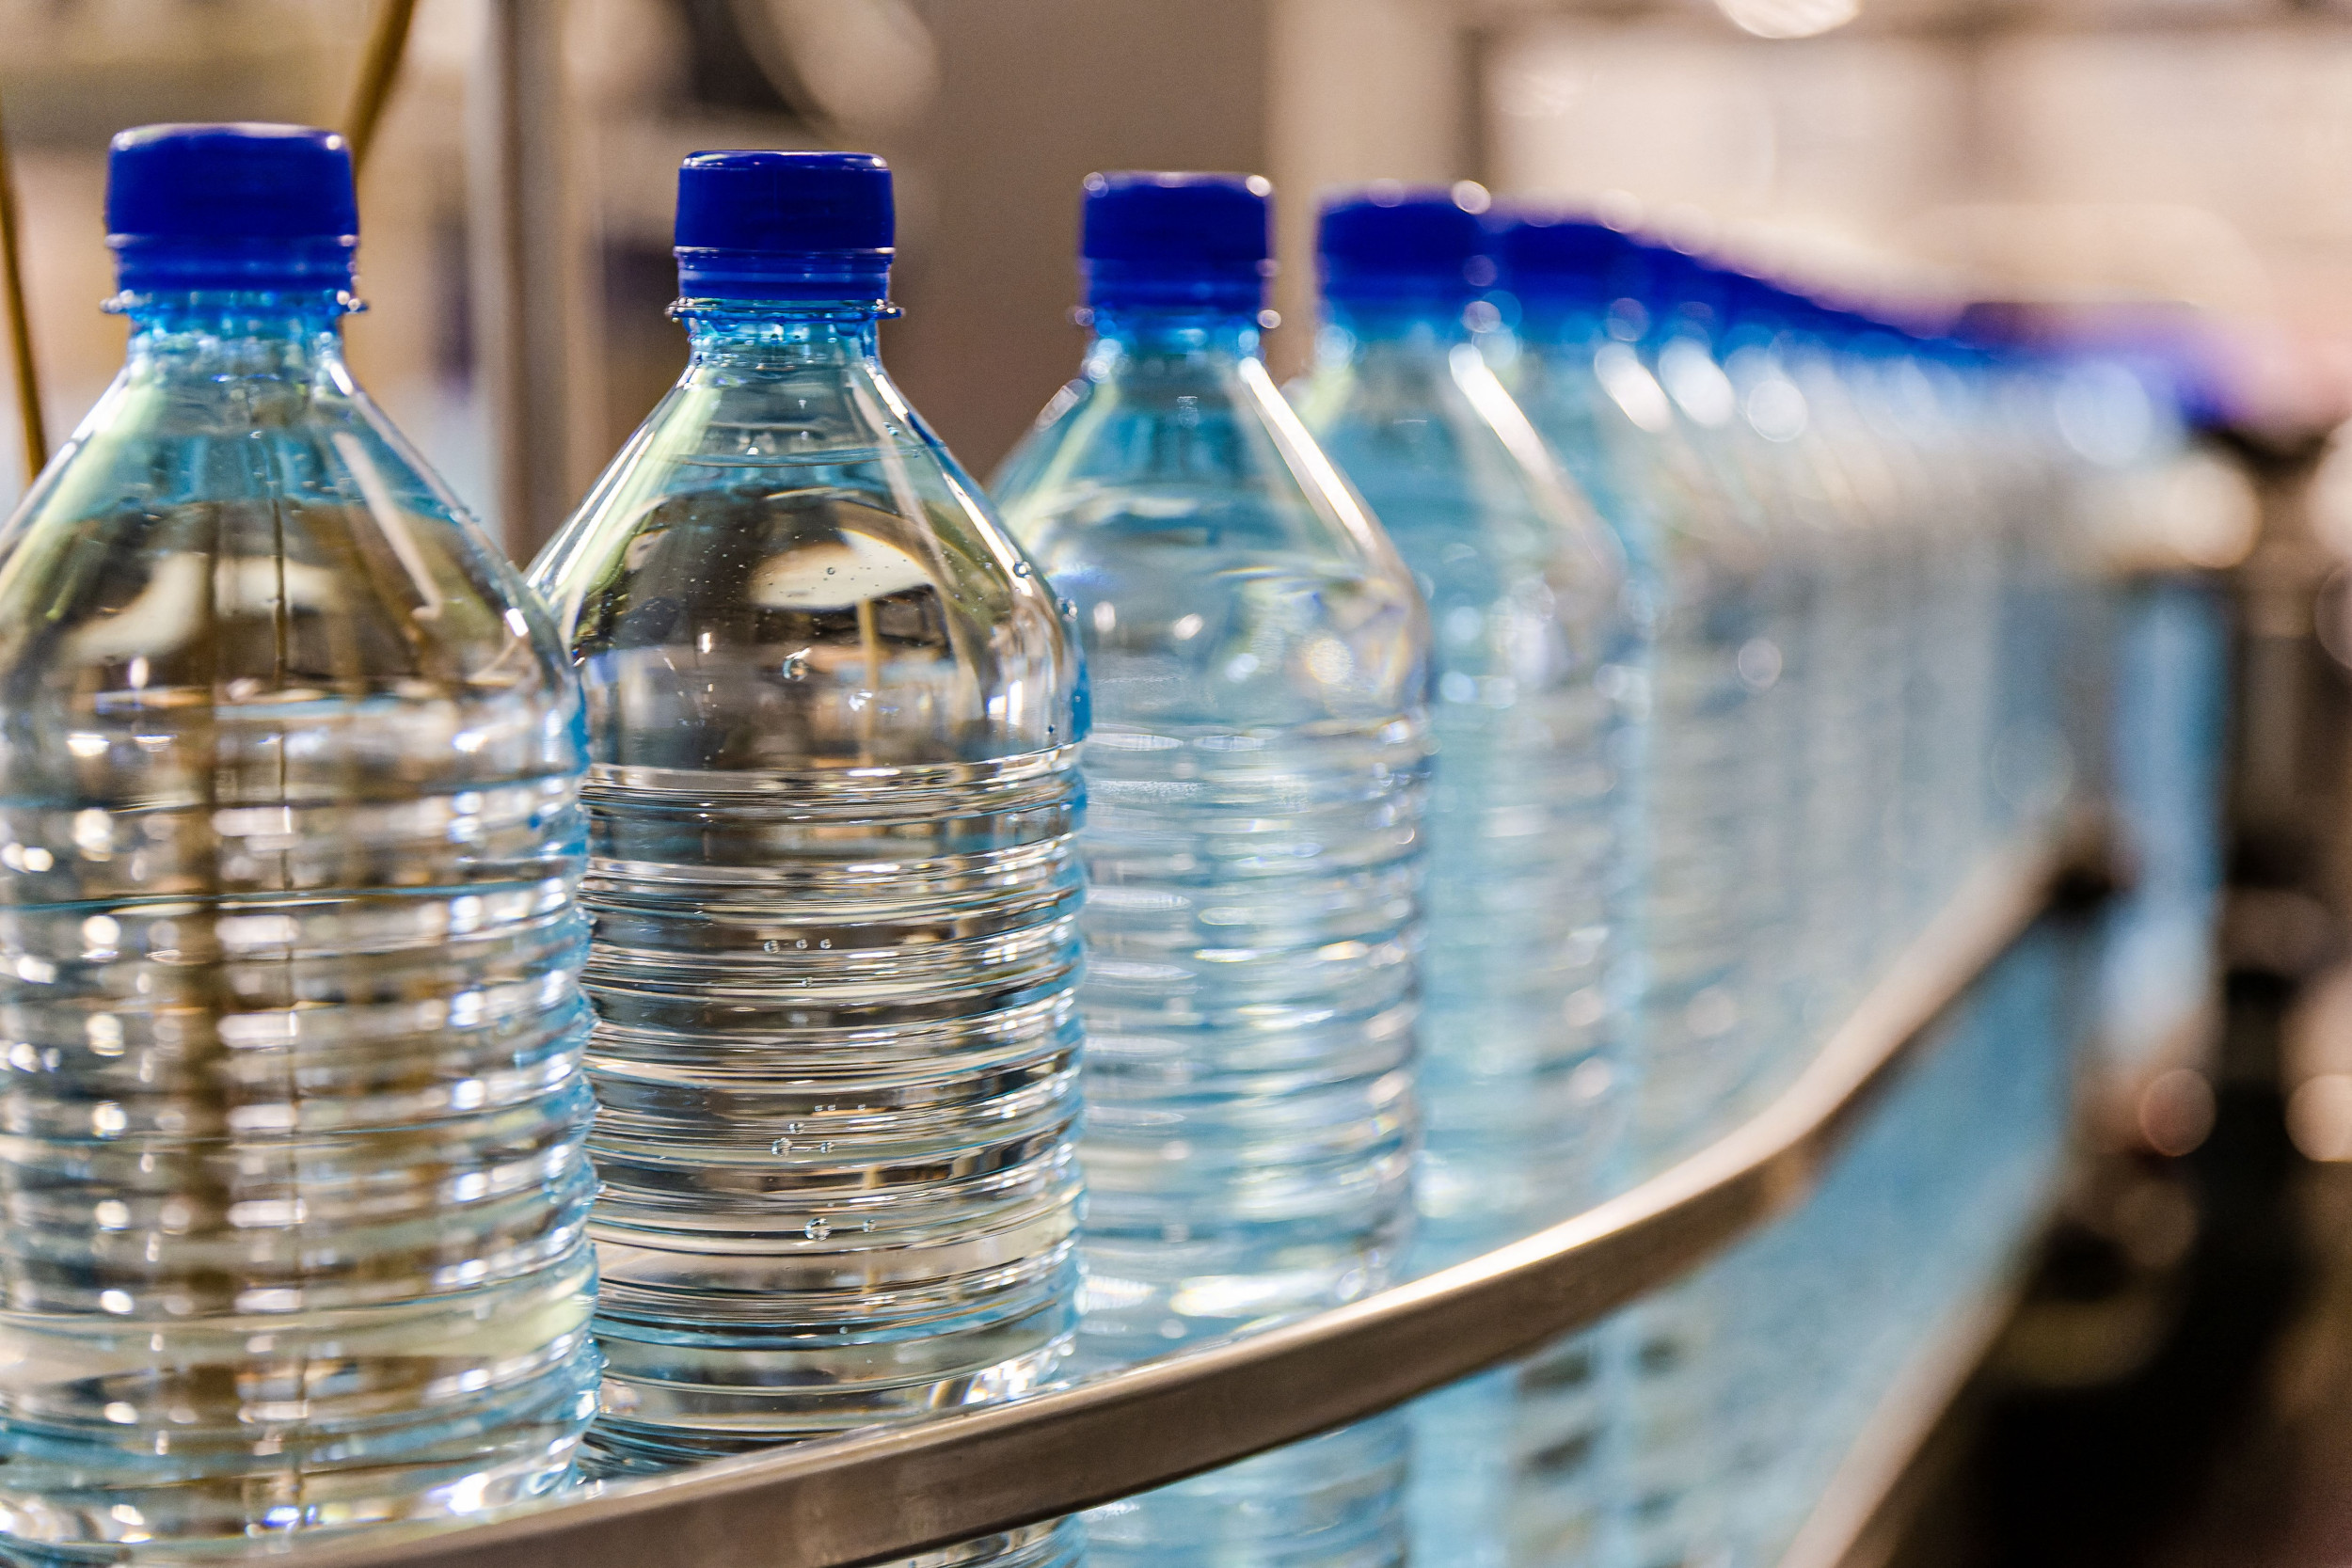 Drinking Water Recall: Full List of Companies With Ongoing Warnings